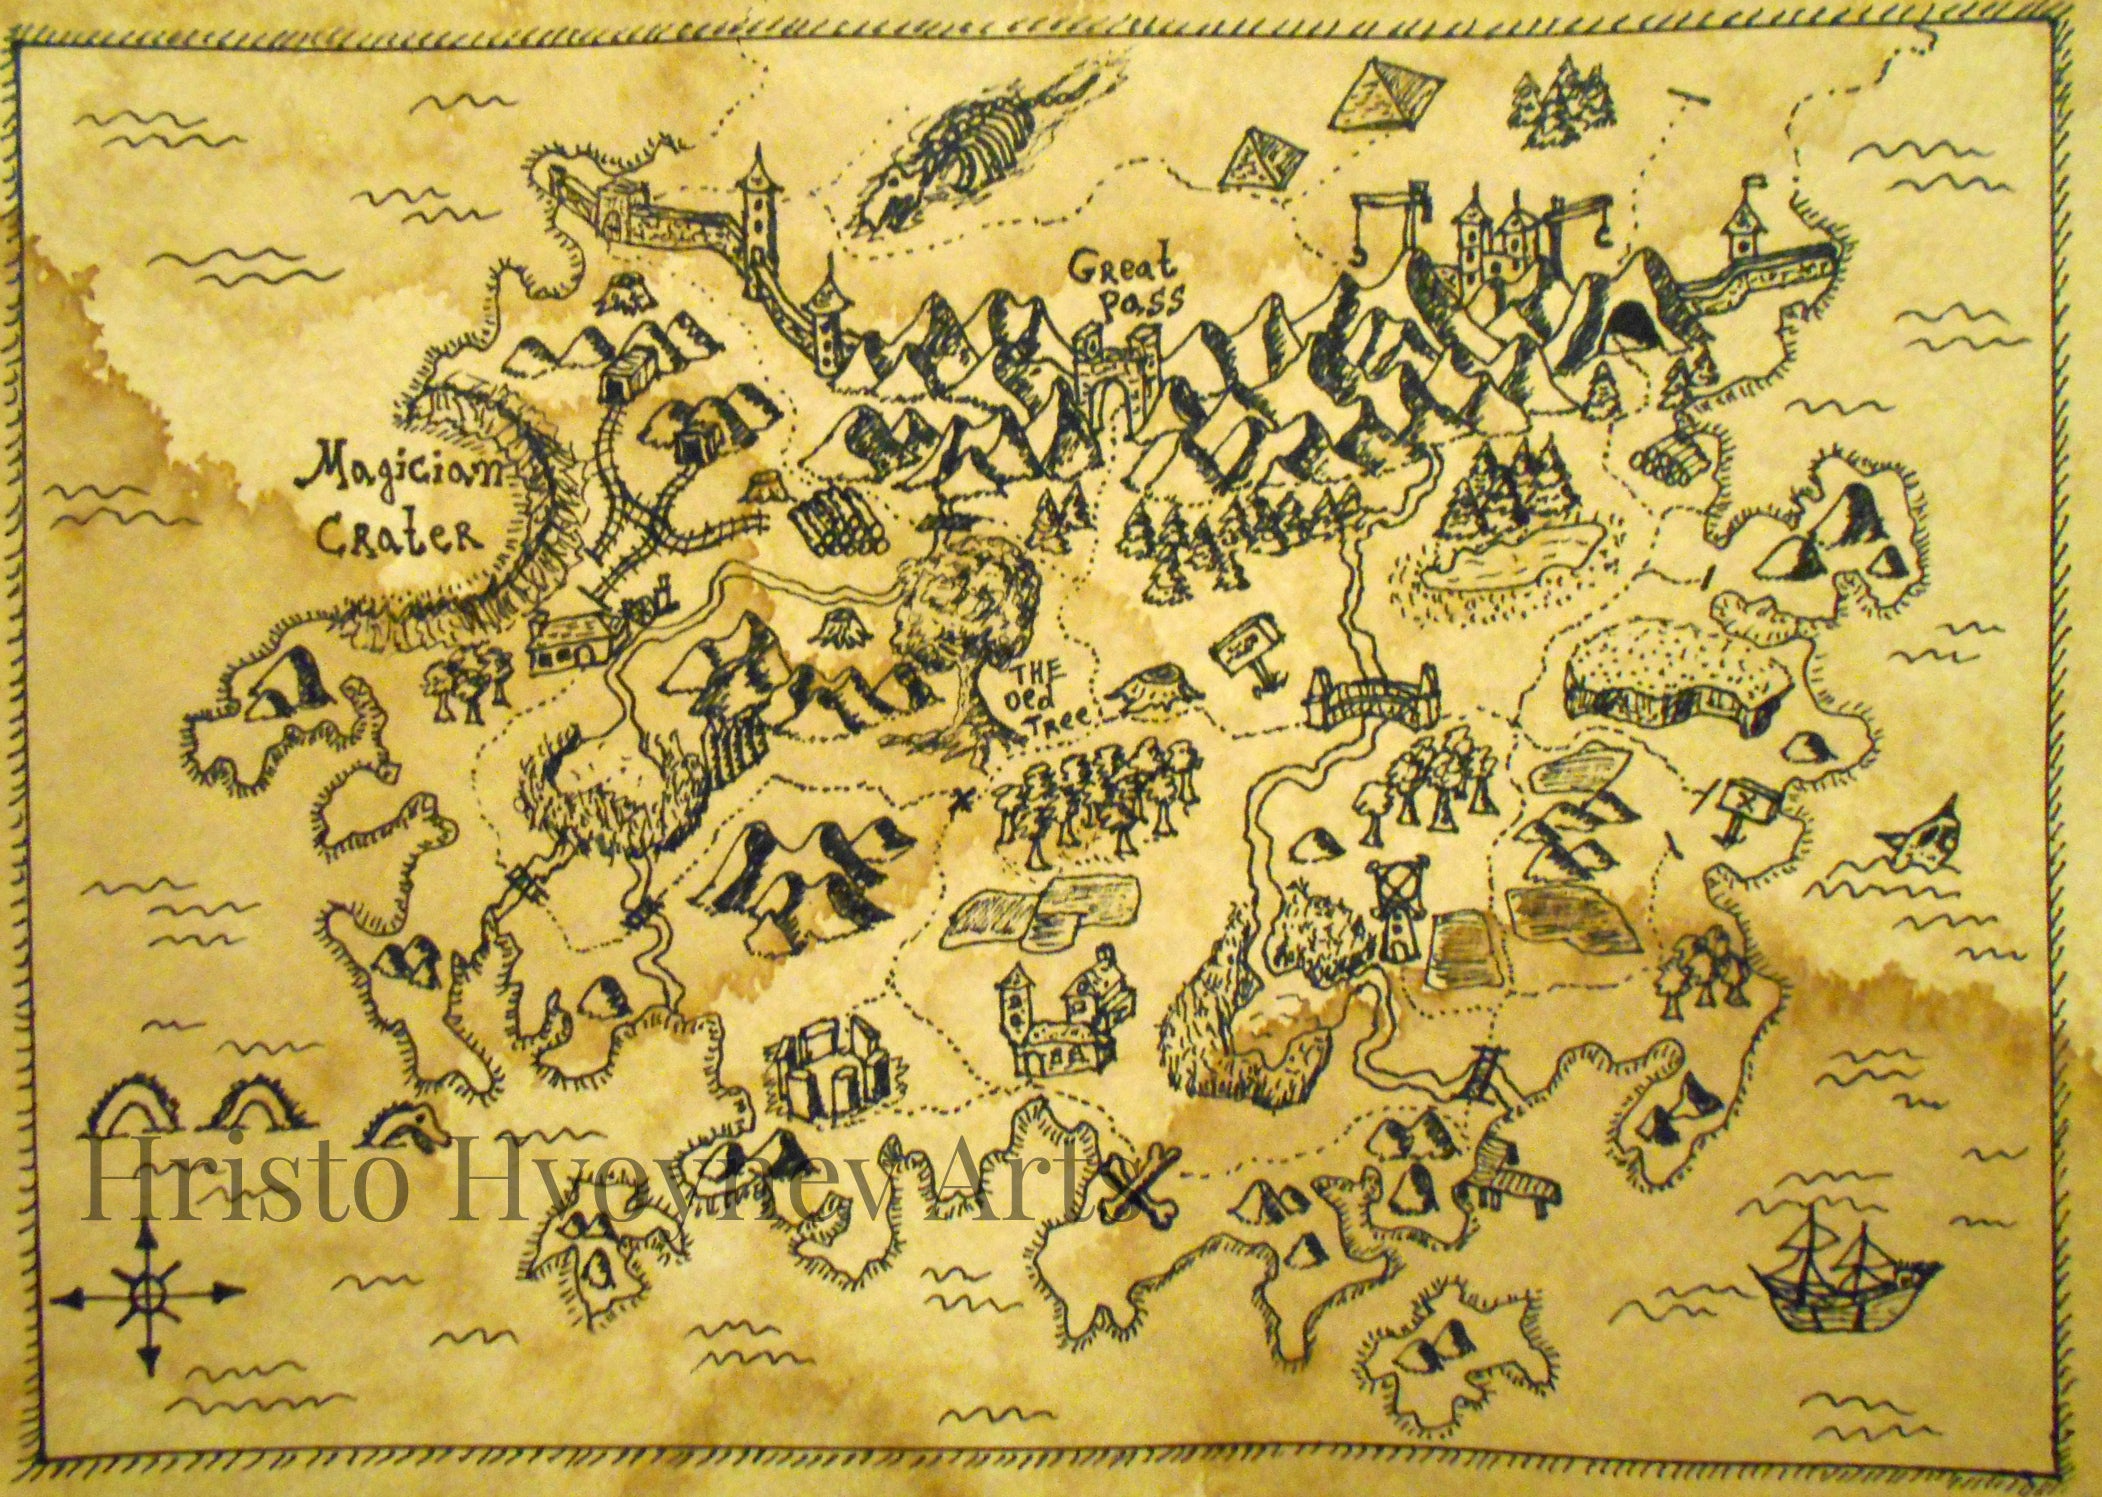 Hand-drawn pirate fantasy map of a part of a continent with forests, mountains, villages and different fortresses